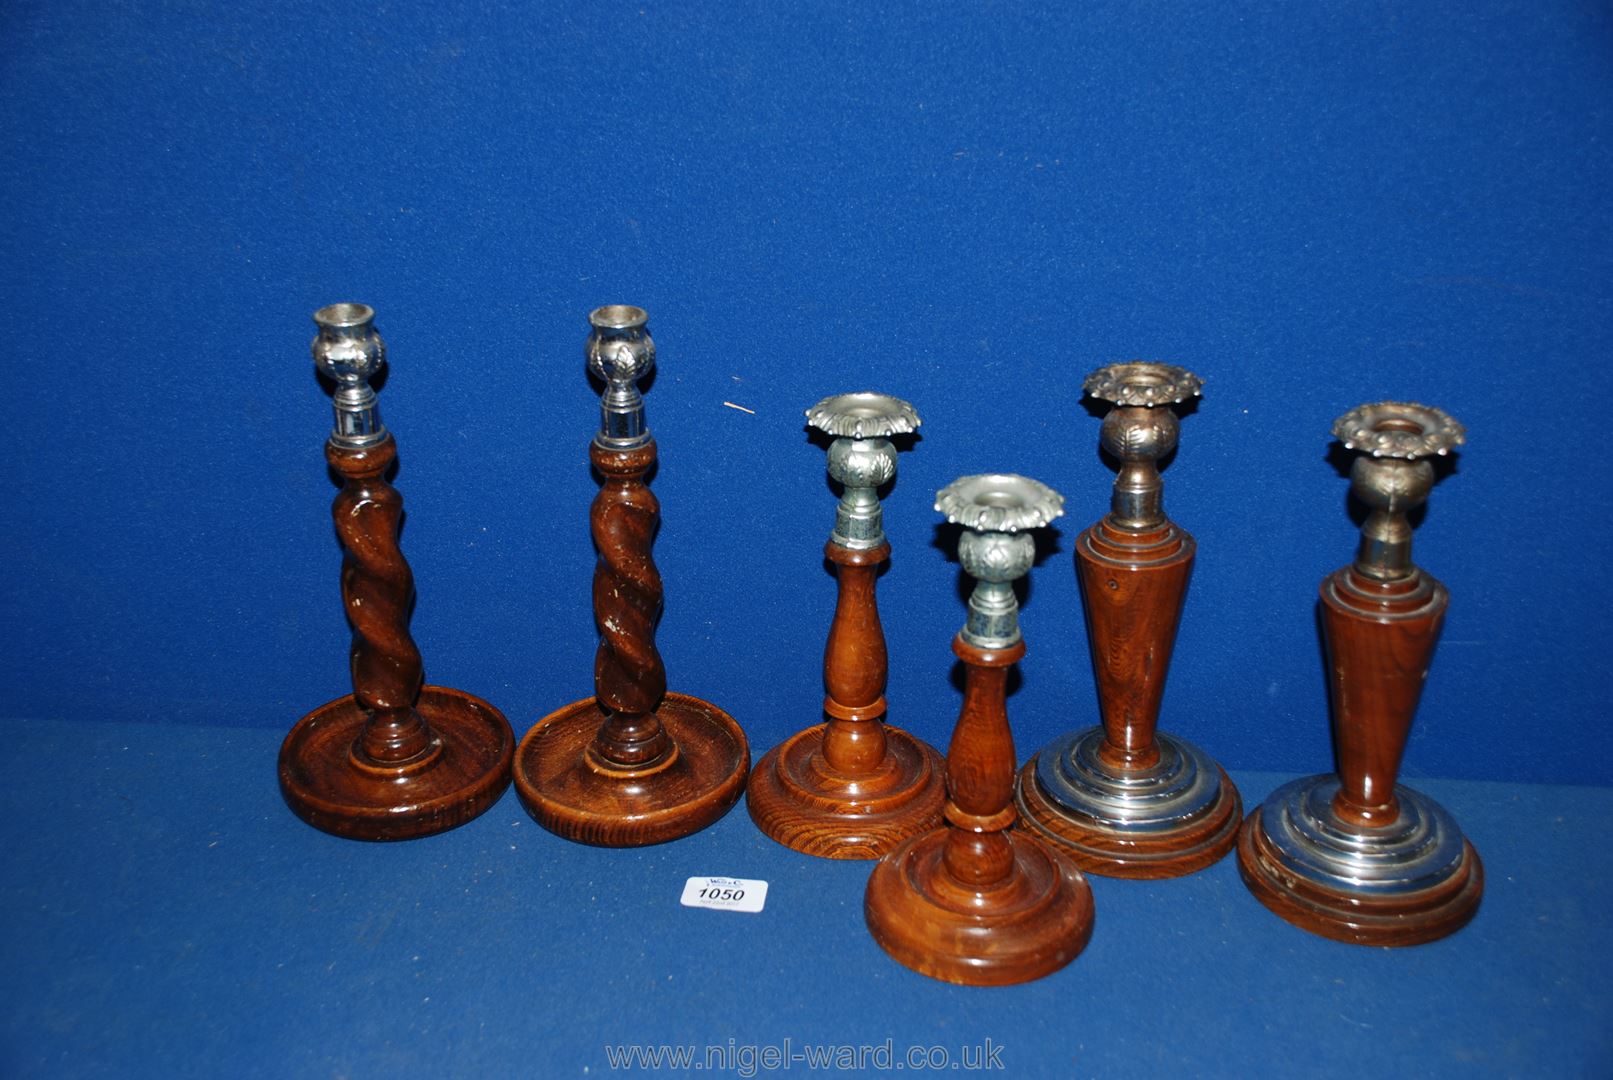 Three pairs of Treen Candlesticks including barley twist and conical shapes